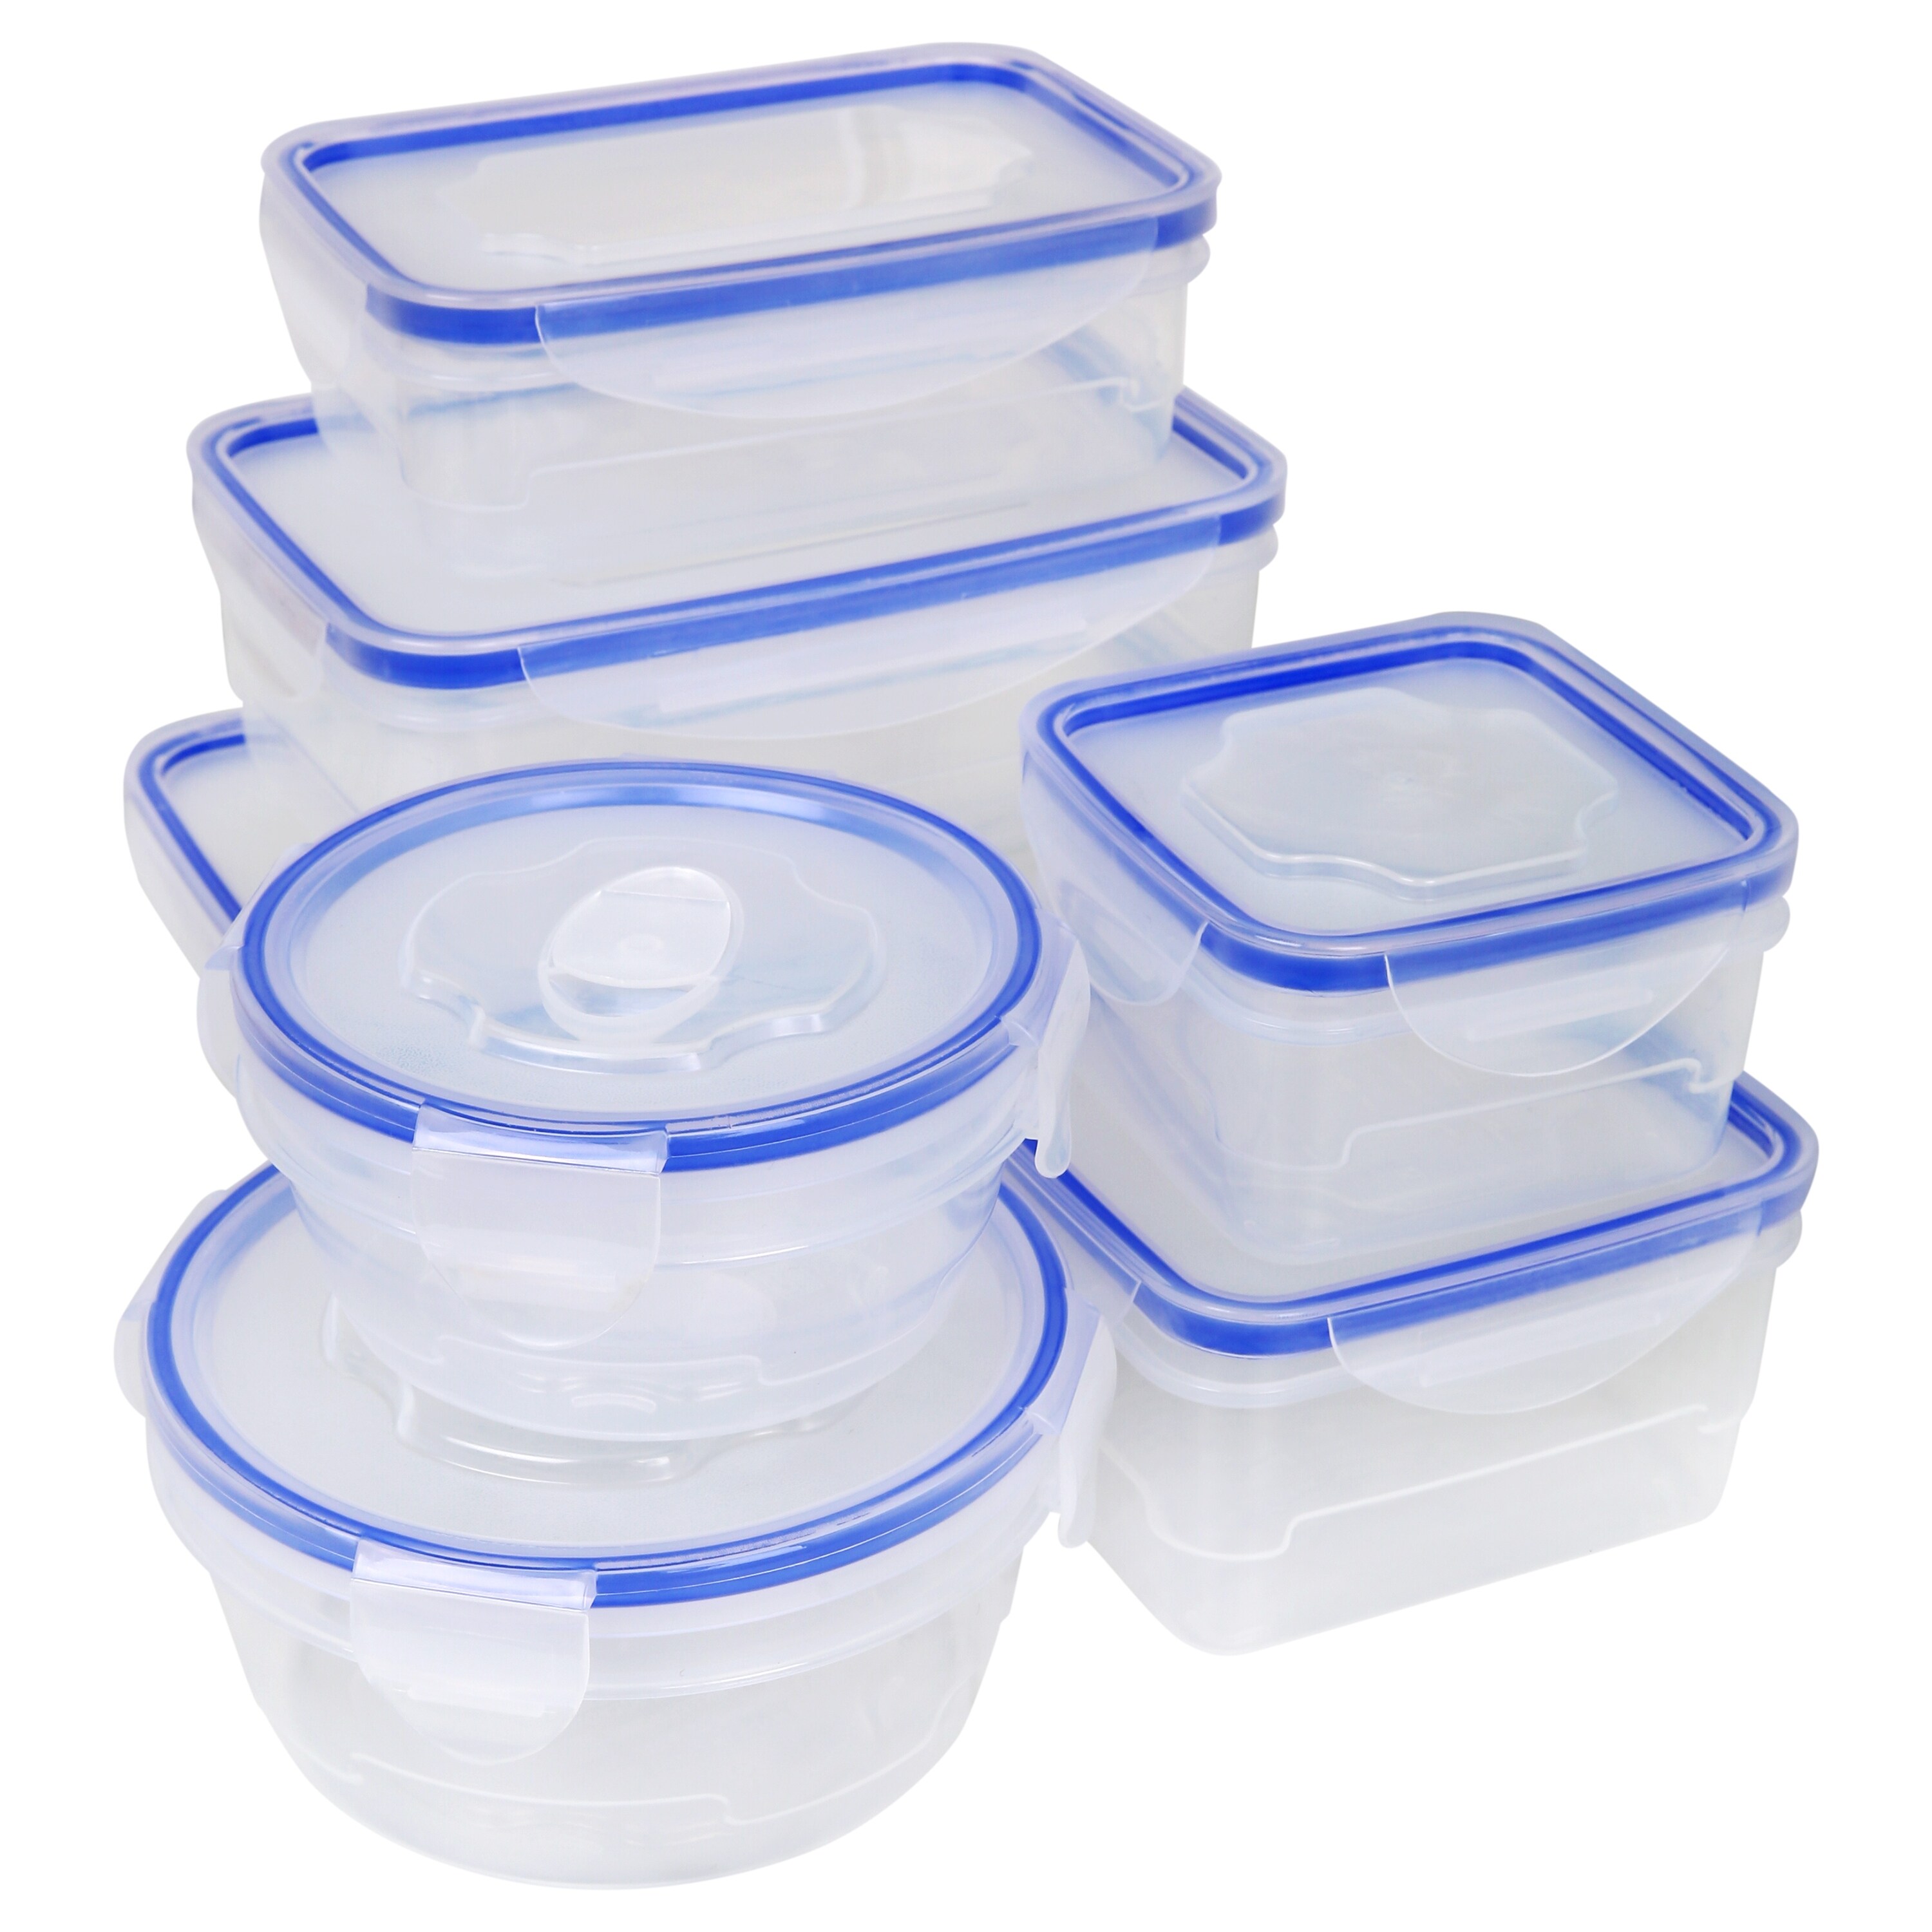 32 Piece Food Storage Containers Set with Easy Snap Lids (16 Lids + 16  Containers) - Airtight Plastic Containers for Pantry & Kitchen Organization  